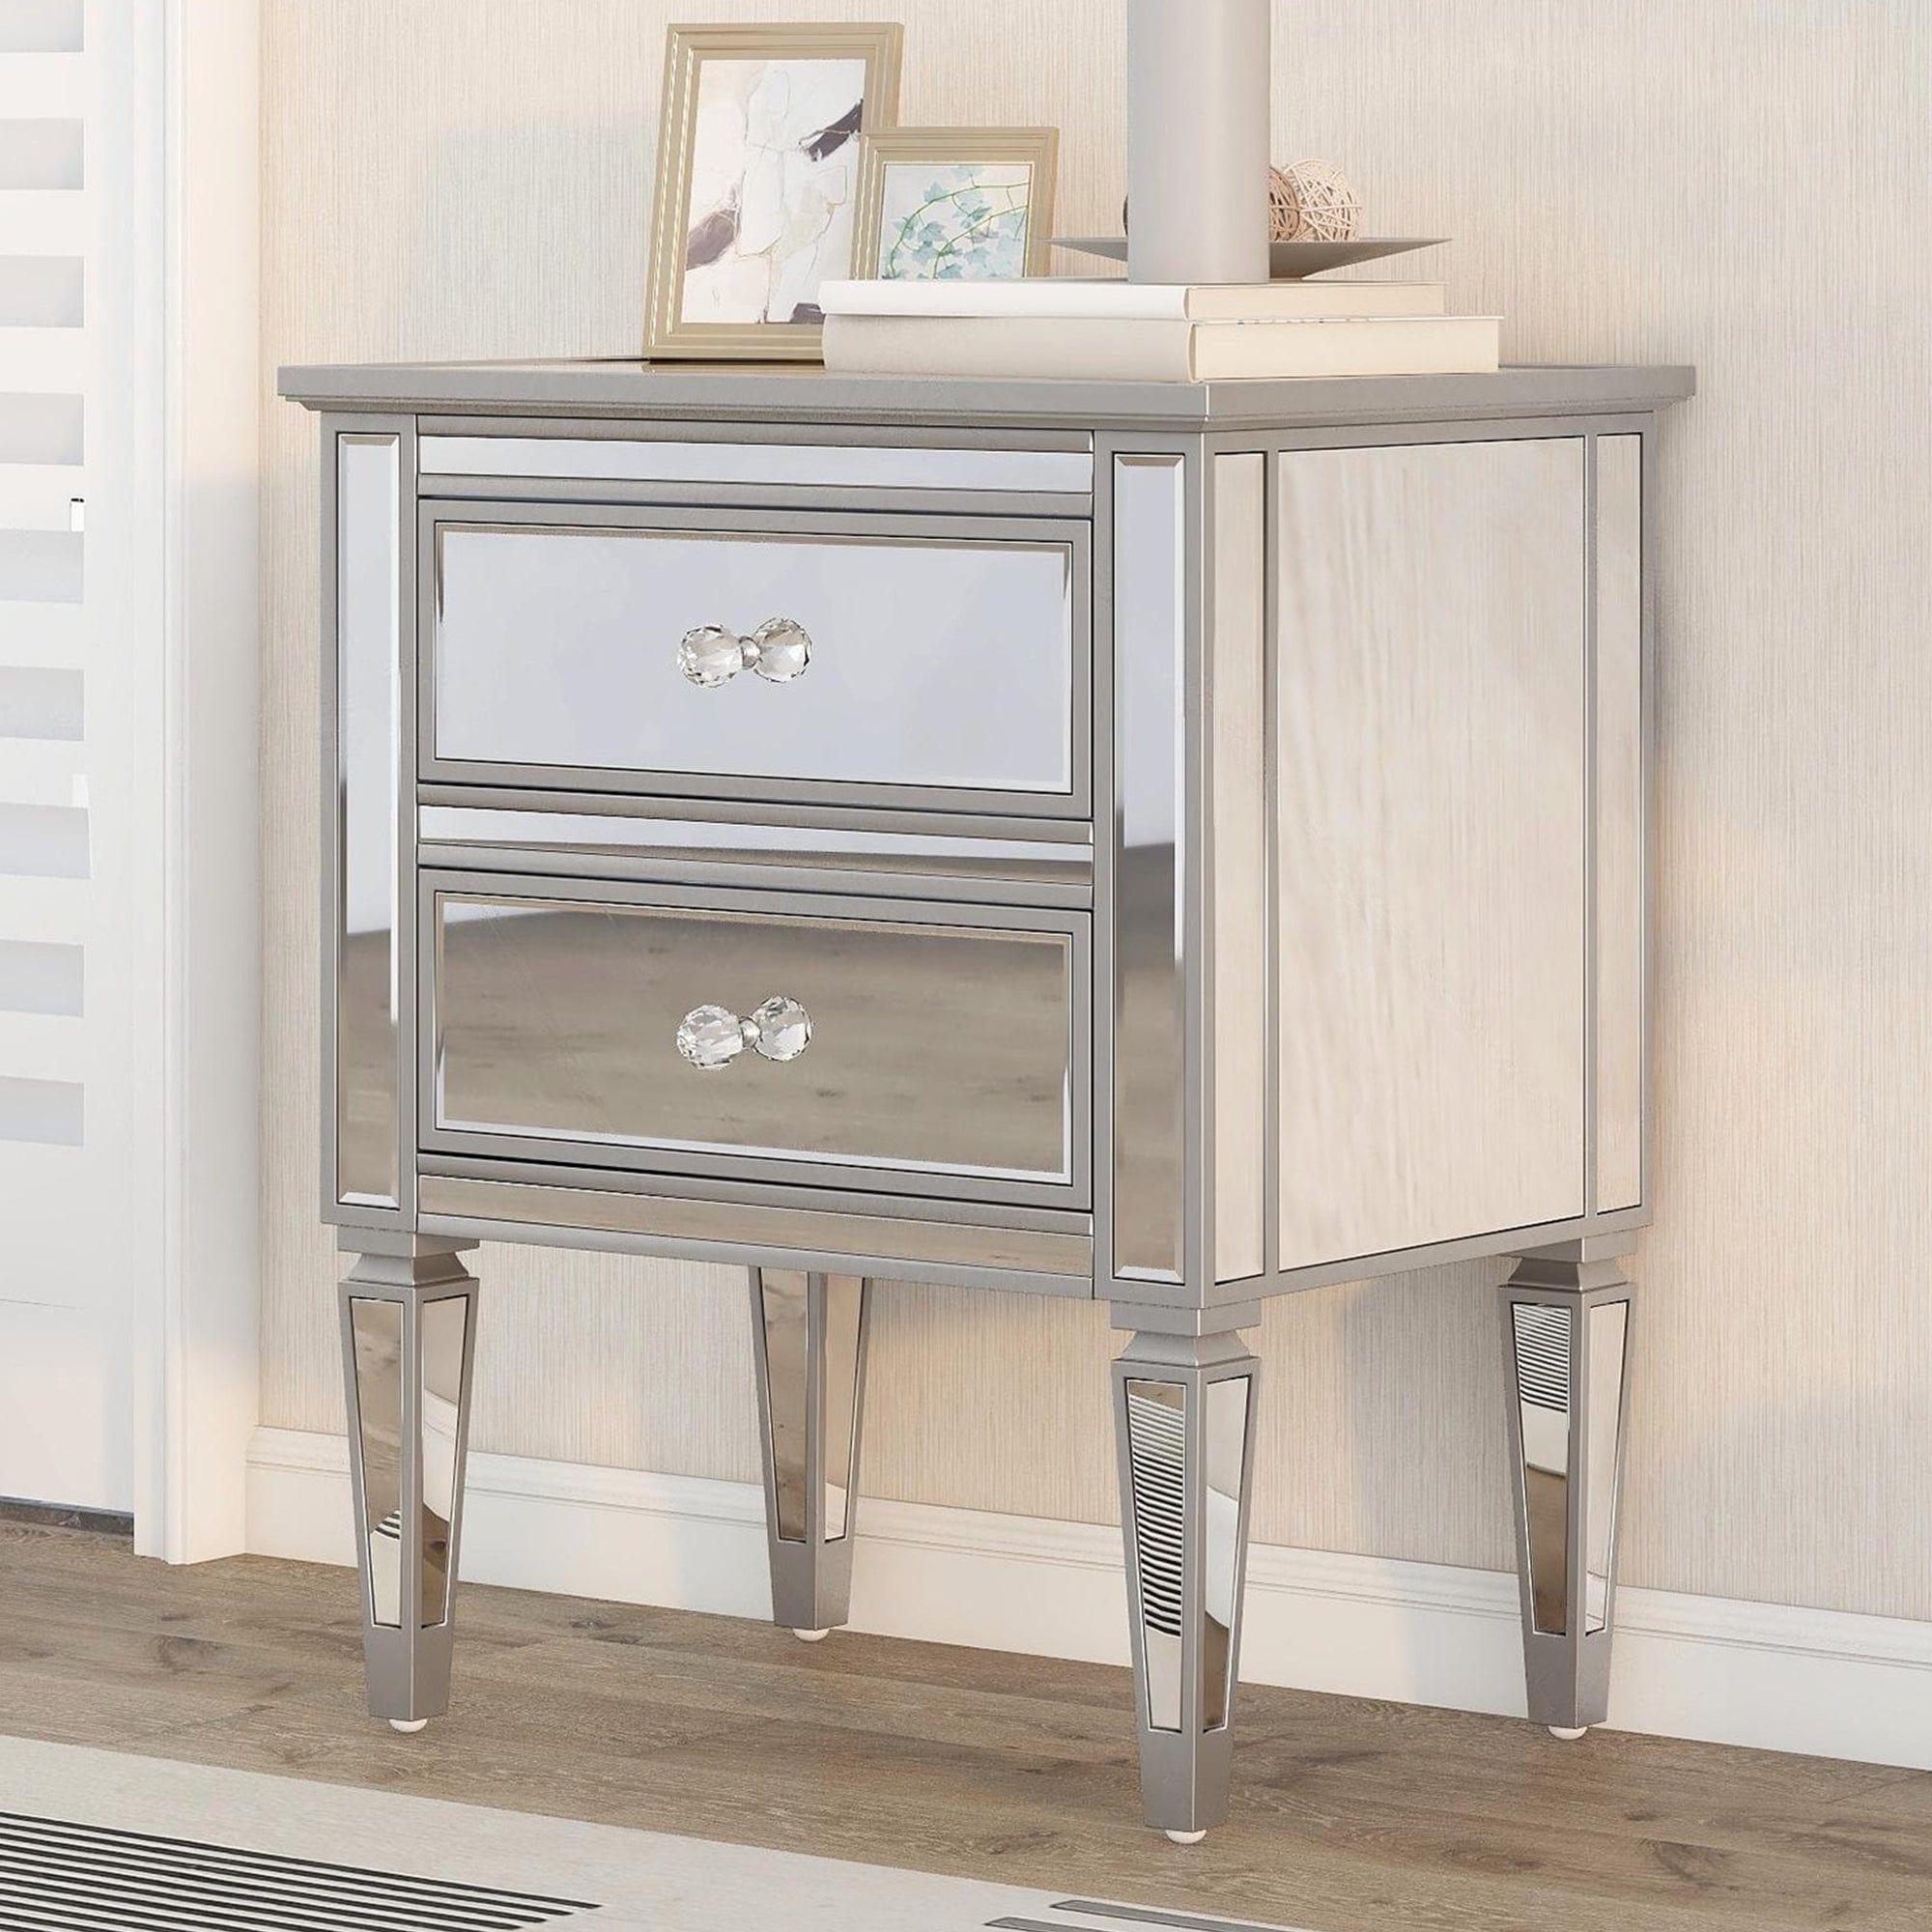 Shop Elegant Mirrored Nightstand with 2 Drawers, Modern Silver Finished End Table Side Table for Living Room Bedroom Mademoiselle Home Decor